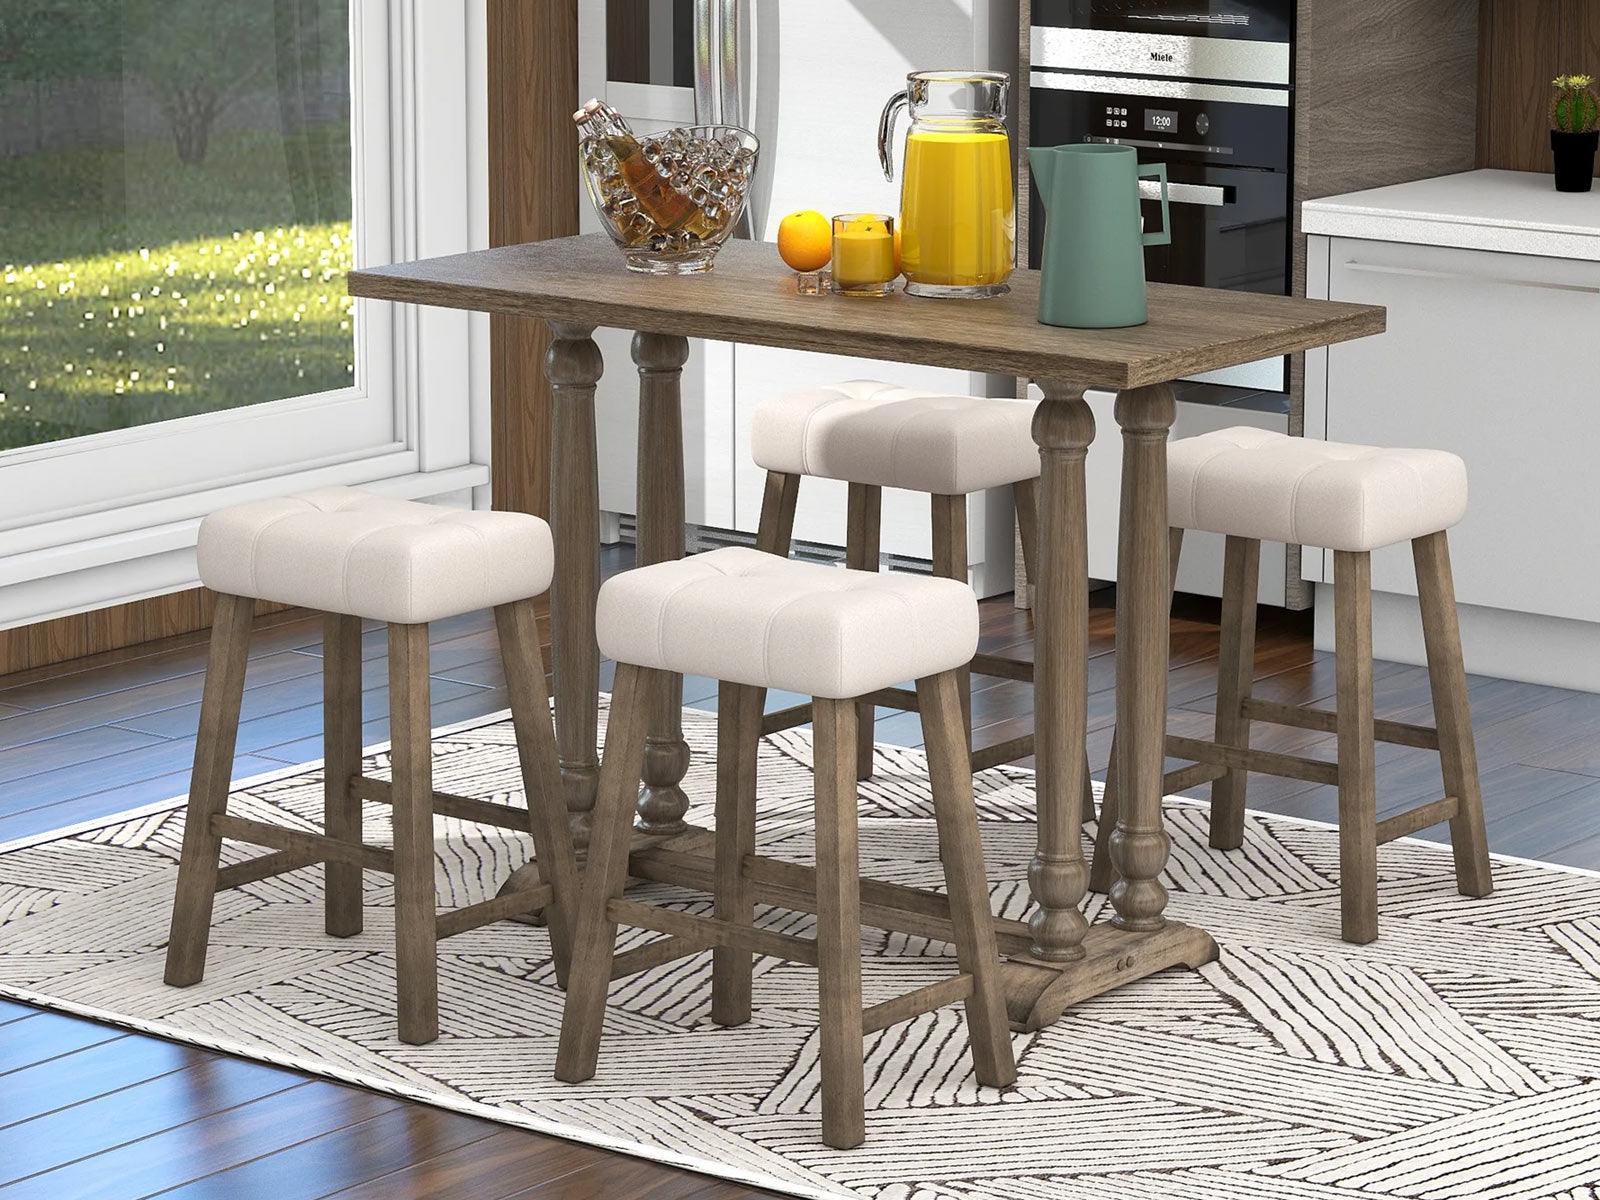 Top 10 4 Seater Dining Table Sets for Stylish Homes in 2023